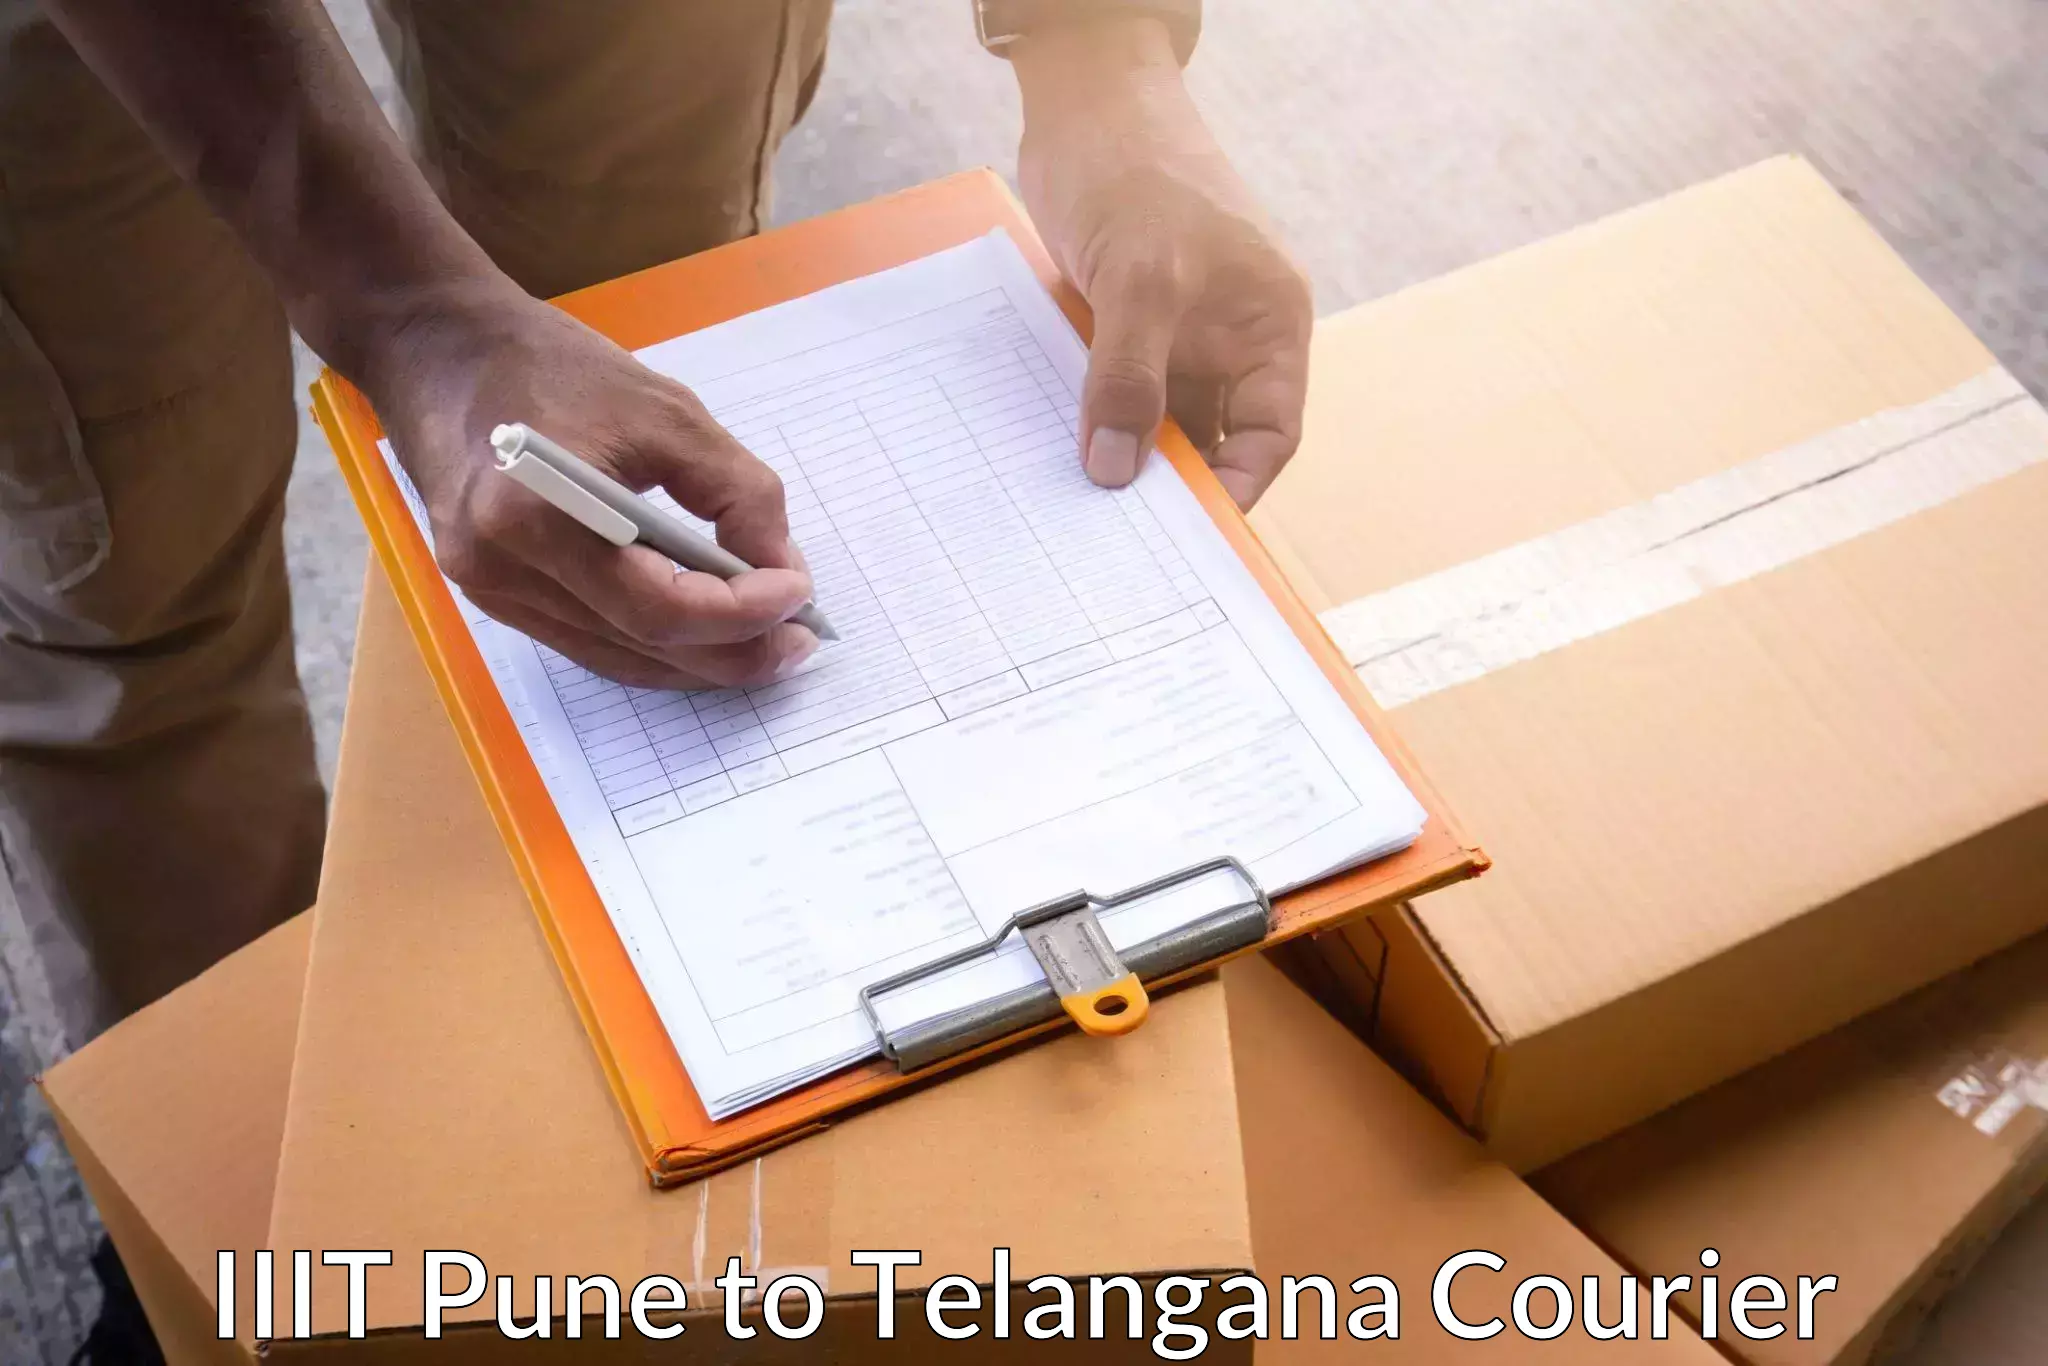 Efficient parcel tracking IIIT Pune to Sathupally